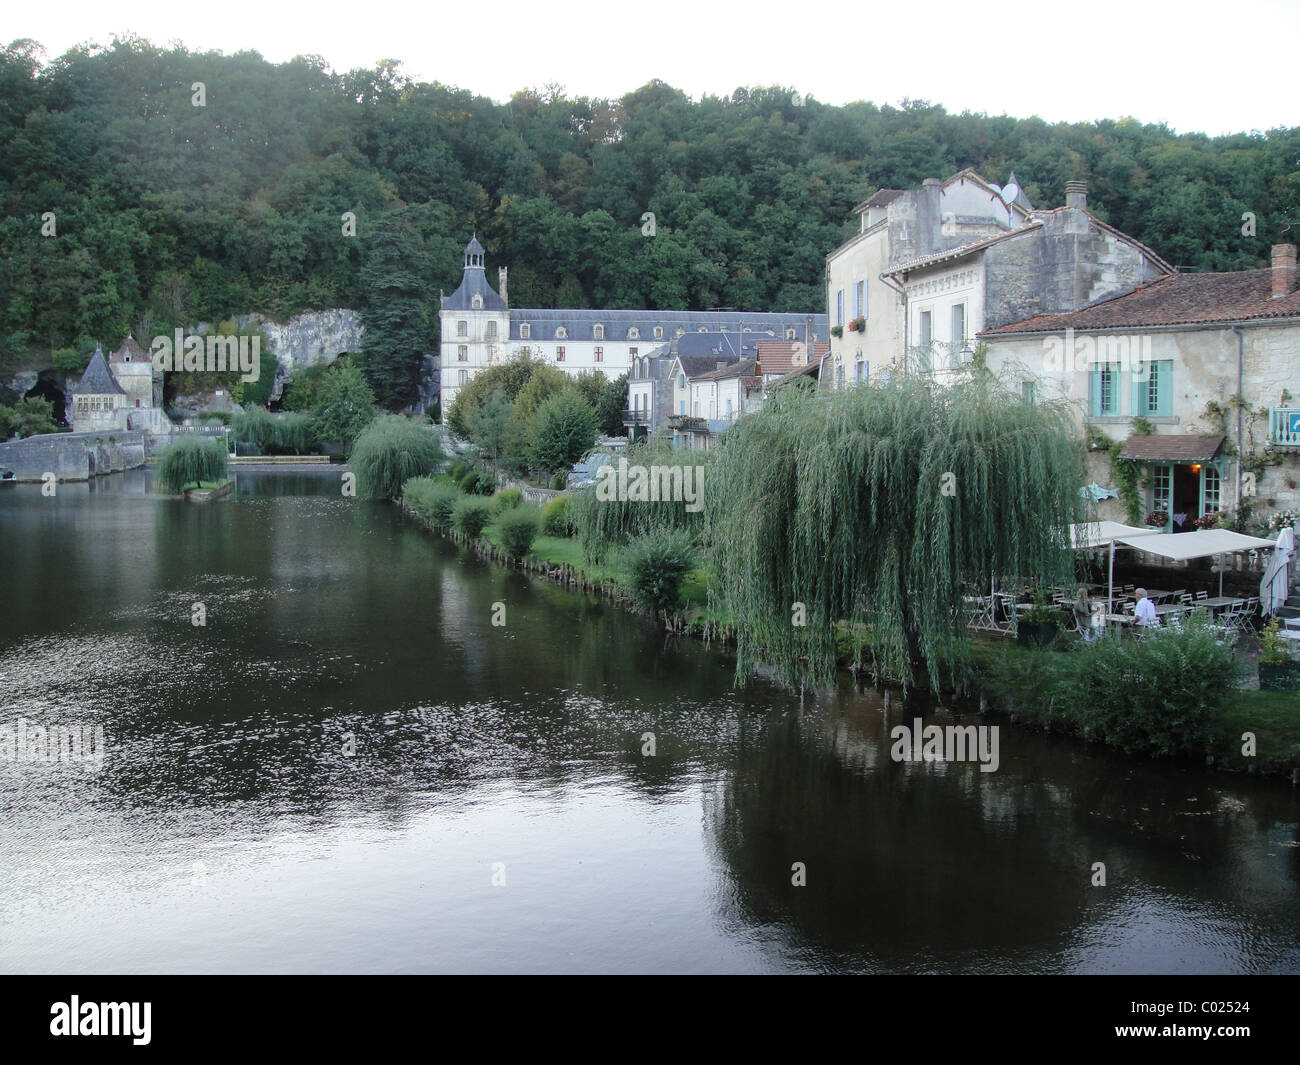 Riverside view of River Donne at Brantôme with houses and restaurant and the Abbey of Brantôme in the background Stock Photo